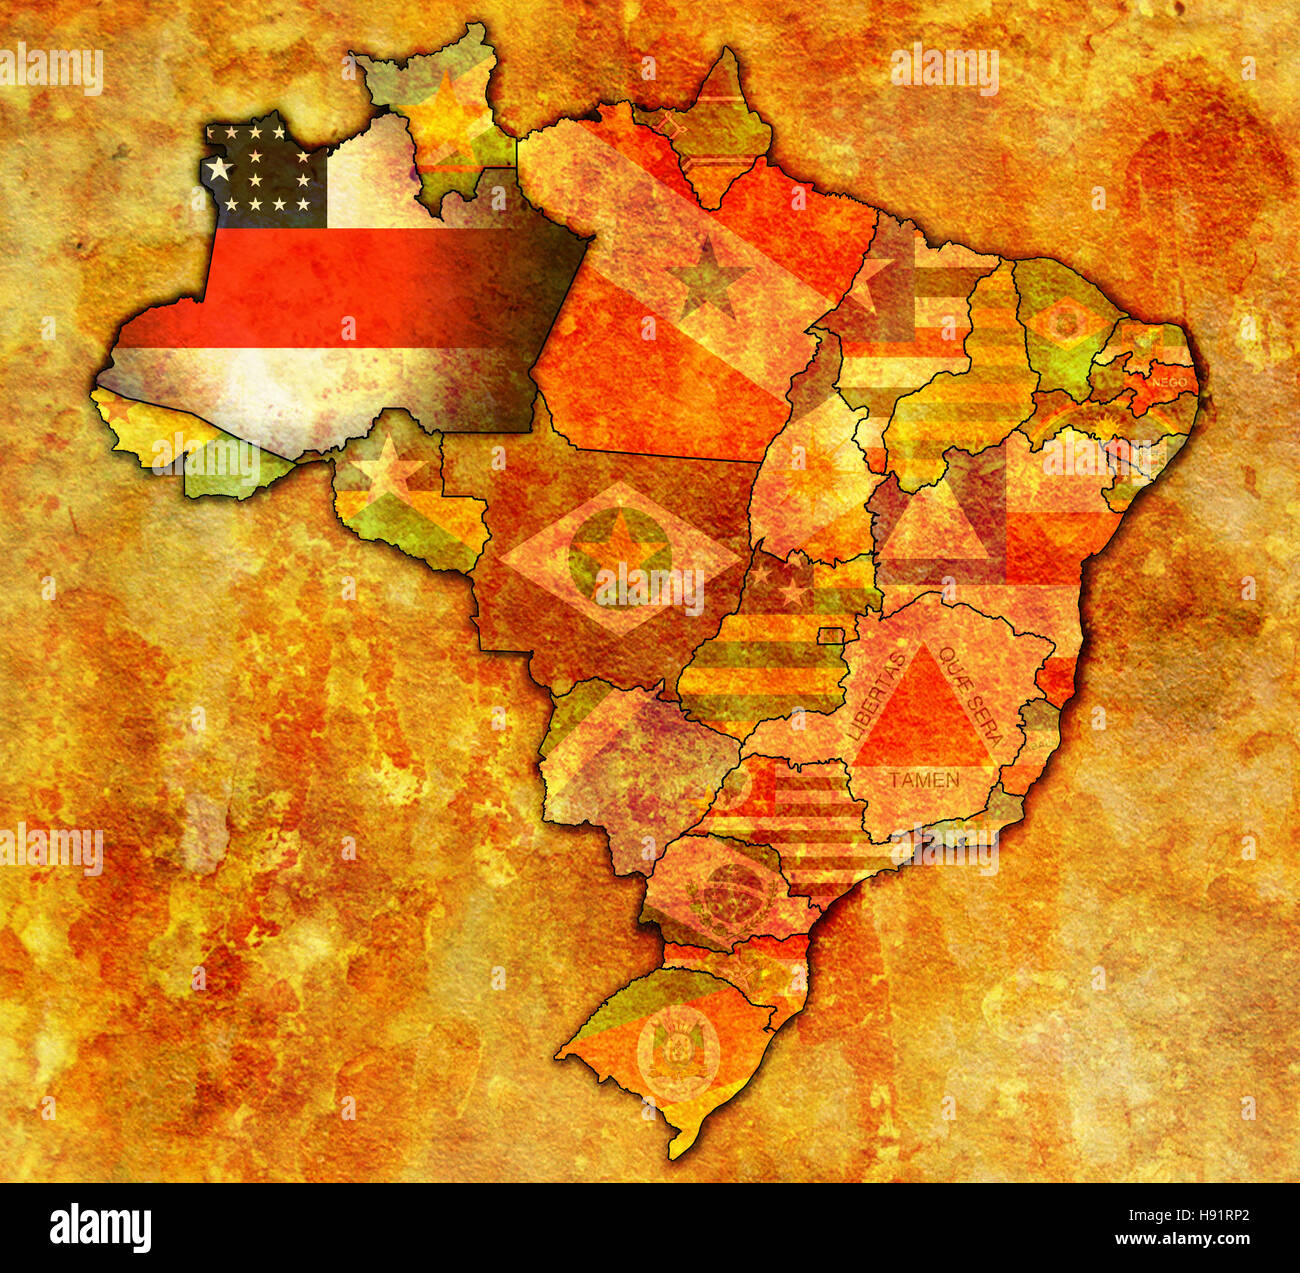 amazonas state on admistration map of brazil with flags Stock Photo